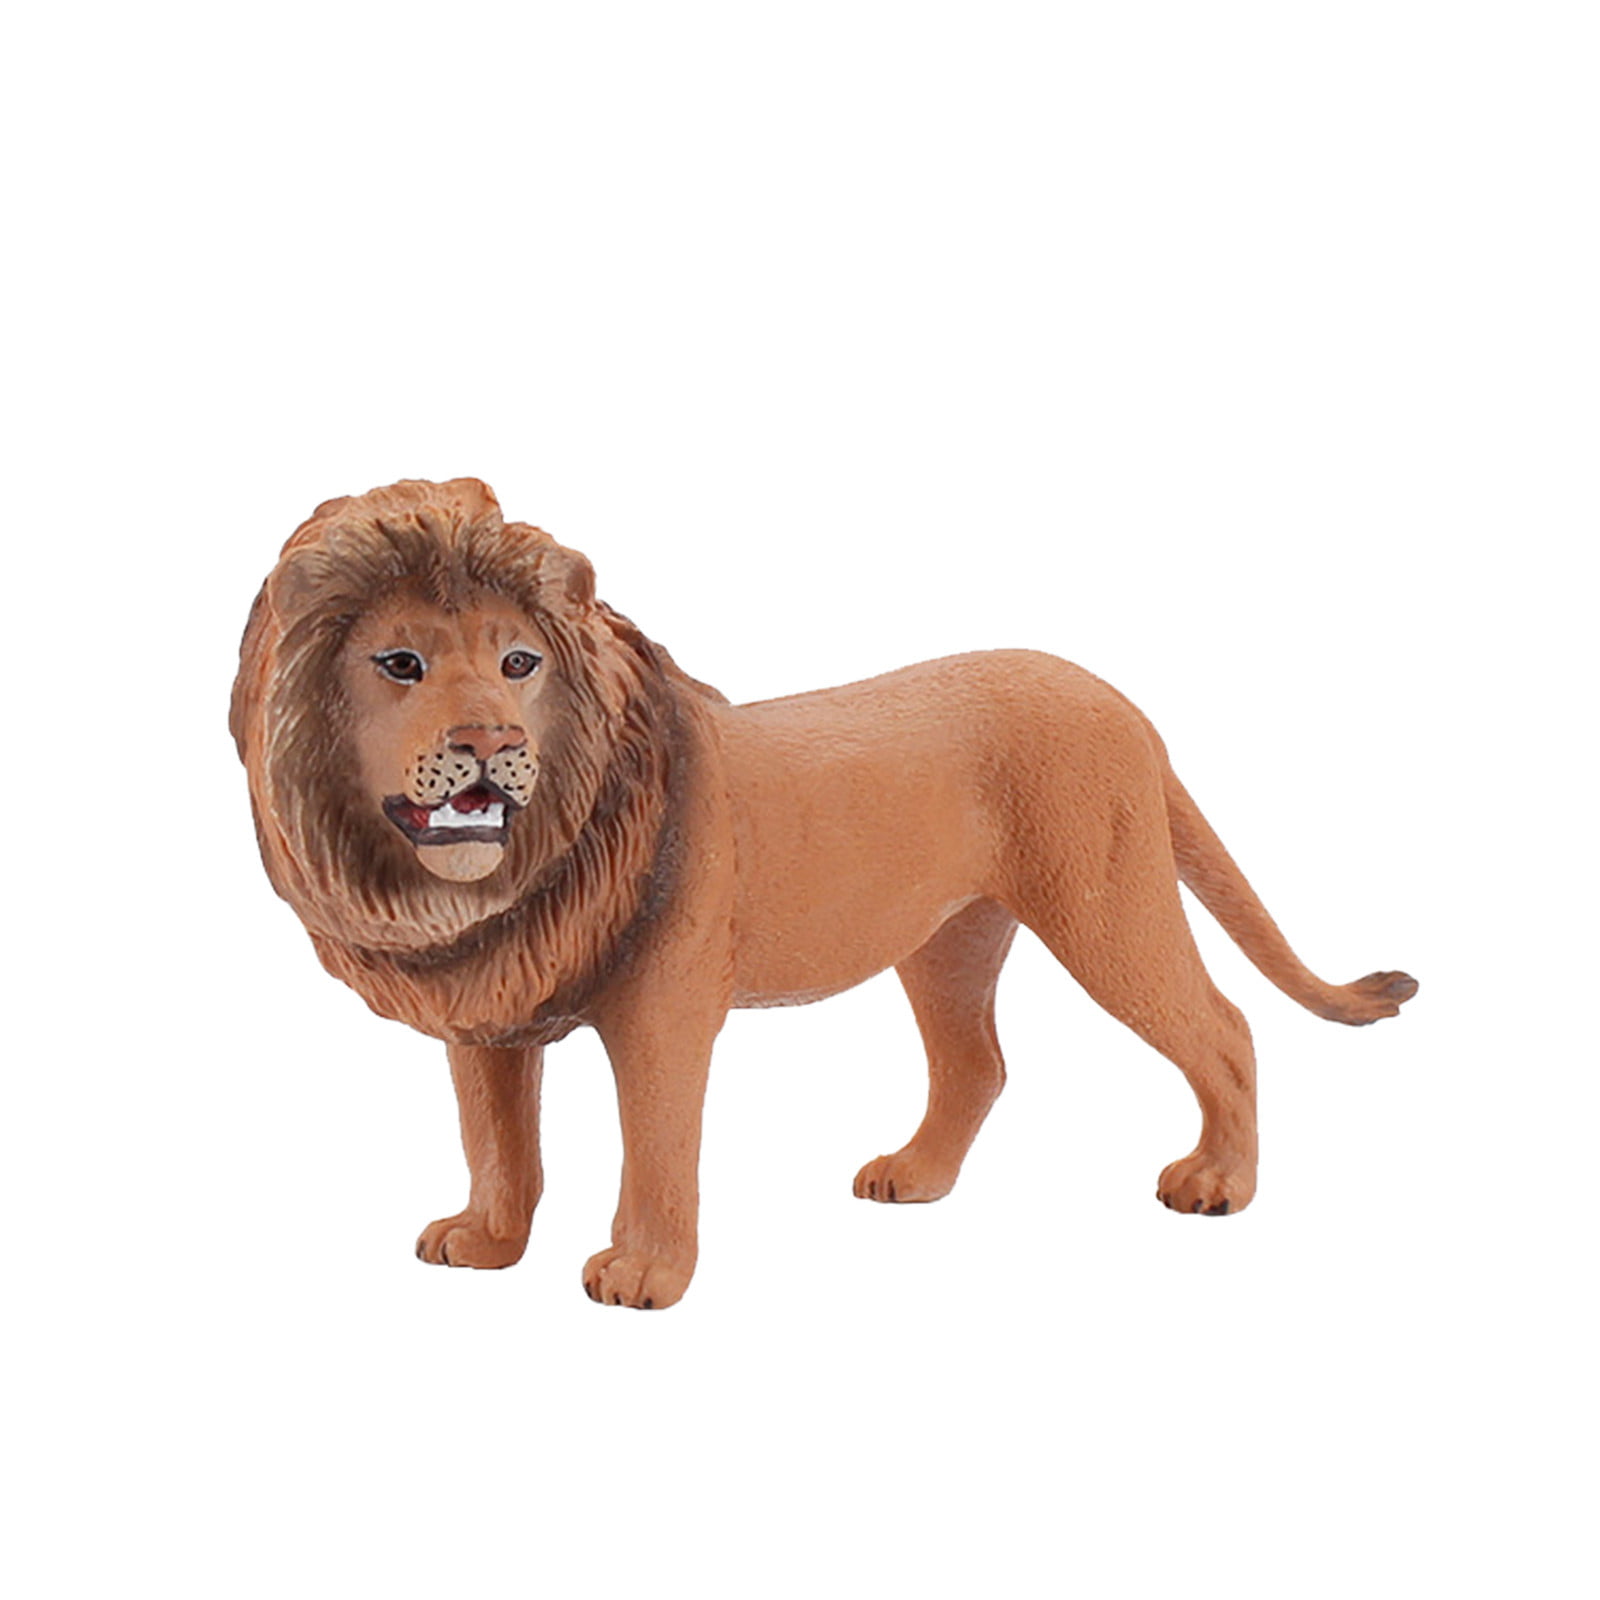 4.7 Inch Plastic Lion Action Figure Statue Toy for Kids Gift Home Décor 